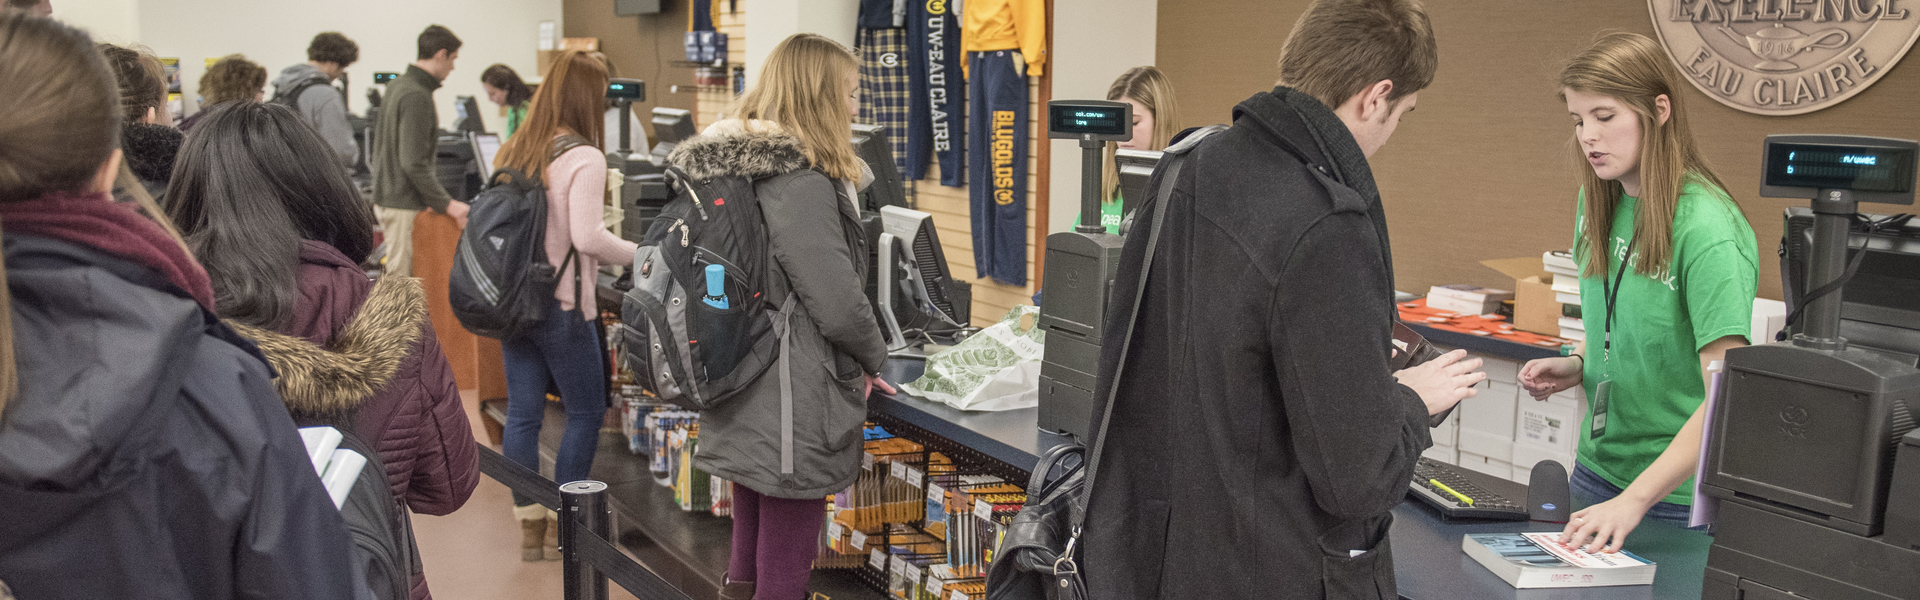 Students flock to the campus bookstore on their first day back.